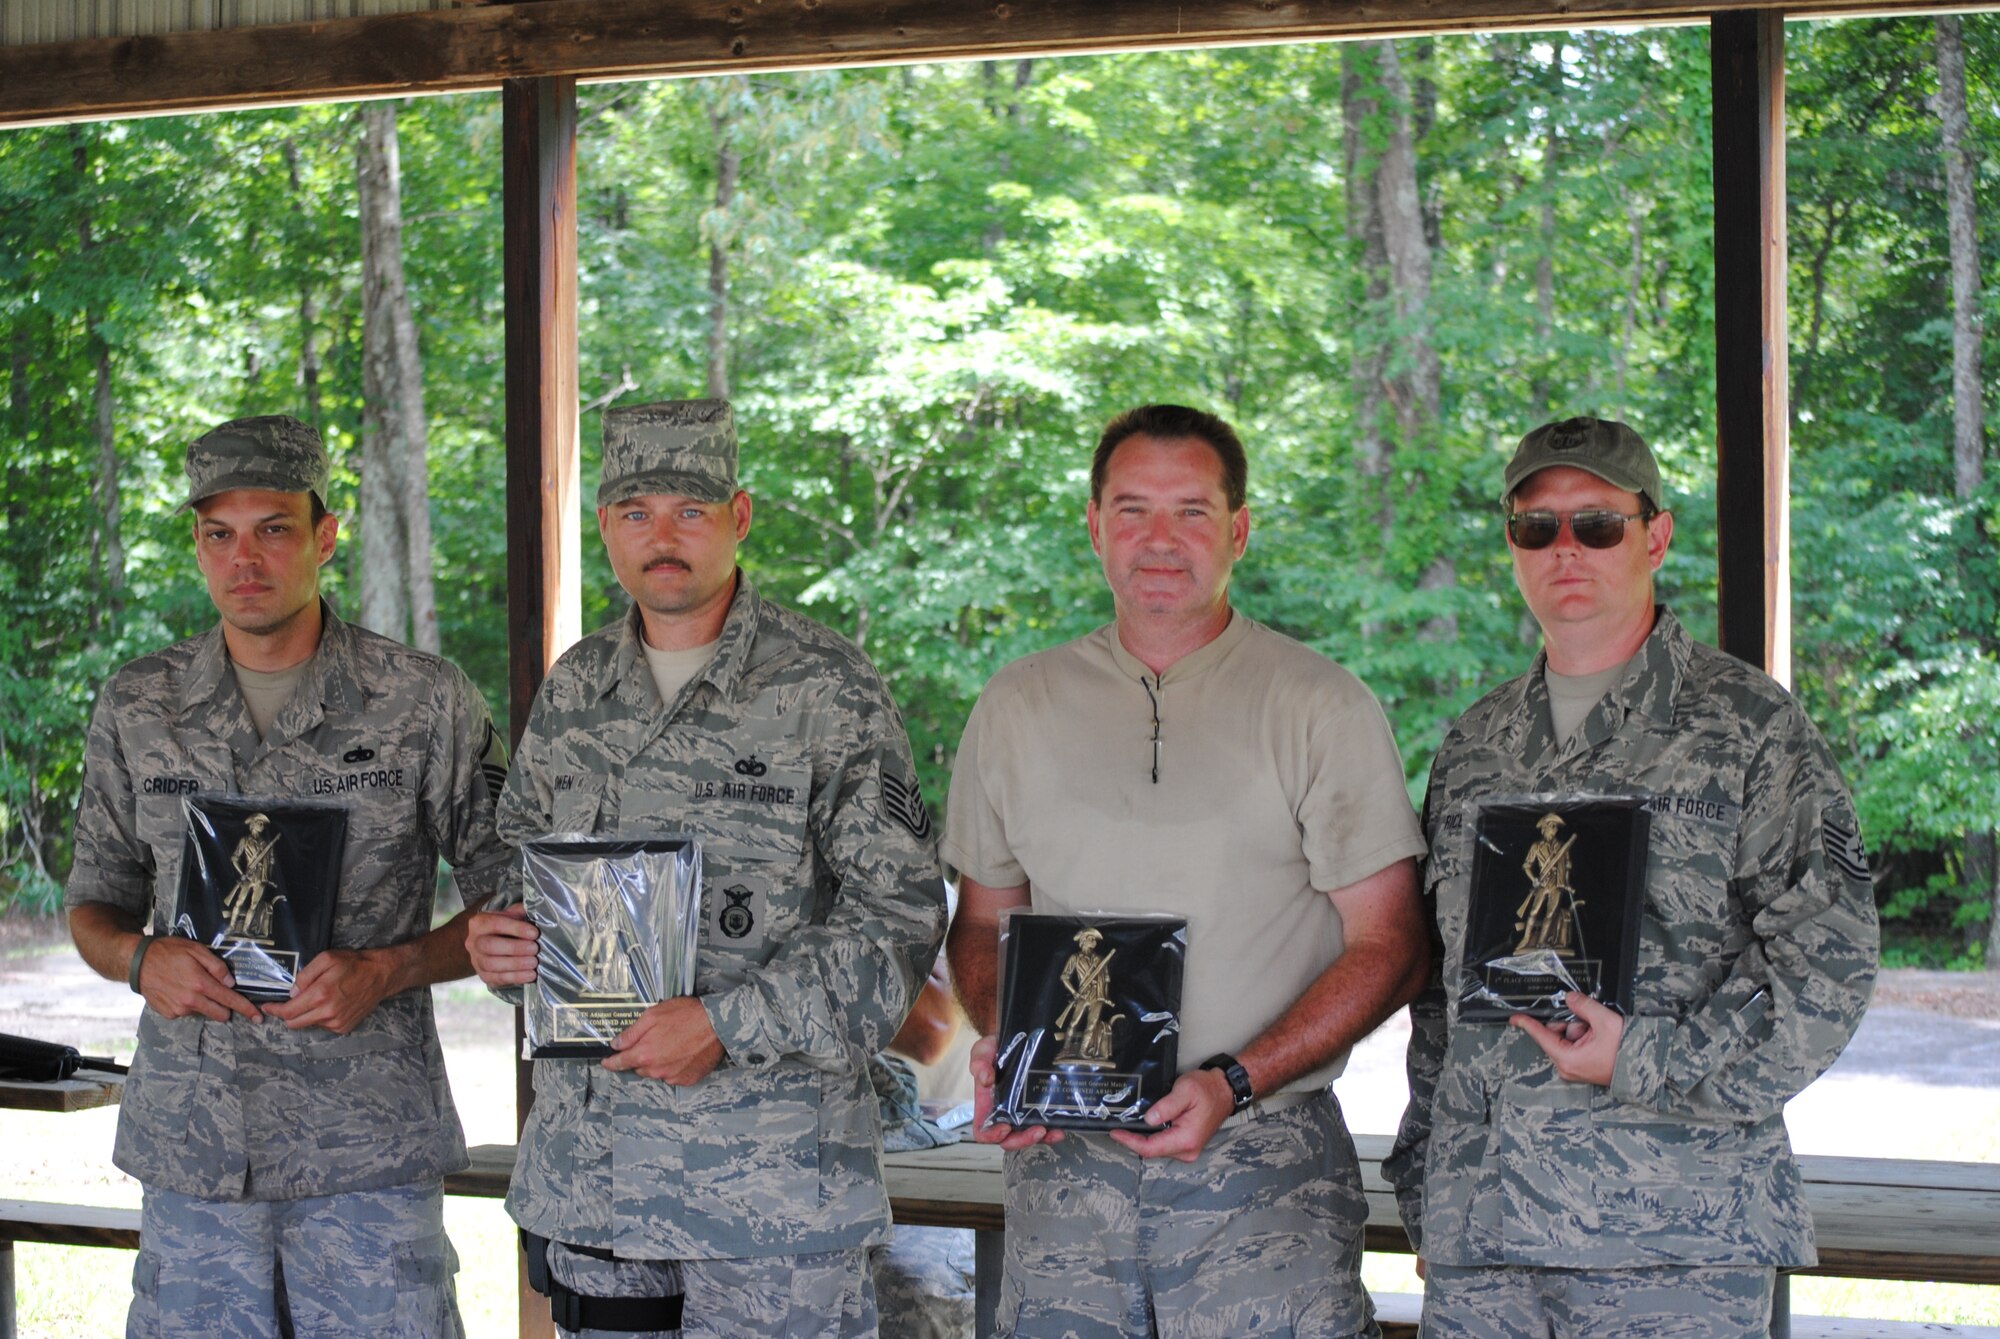 Master Sergeamnt Crider, Technical Sergeant Owen, Lt. Colonel Stiles and Technical Sergeant Rice of the 164AW hold their 1st place trophies after winning the overall team competition at the 2010 Tennessee National Guard Shooting Match.